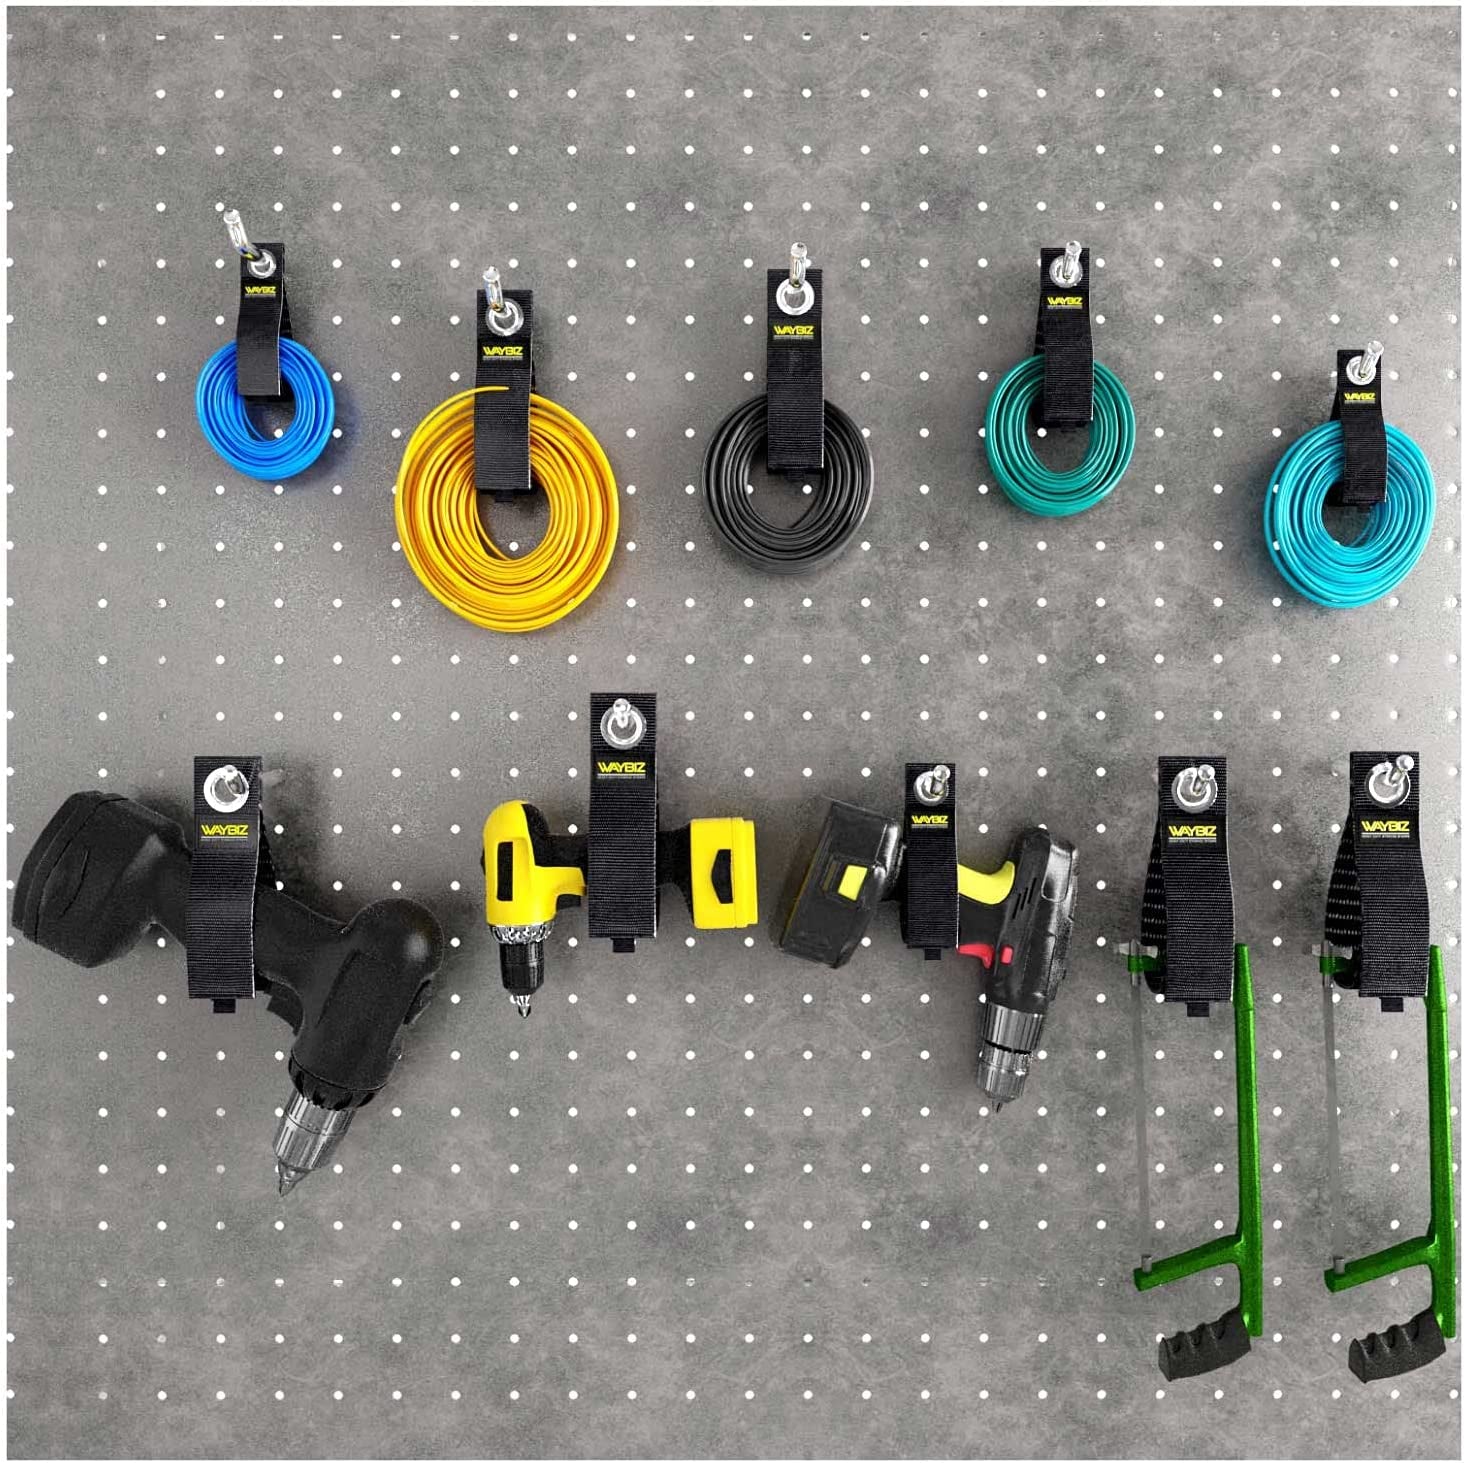 Extension Cord Nylon Storage Straps Holder Organizer,  Heavy Duty Hook and Loop Wraps Ties for Cables Wires Ropes Pool Hoses Pack of 4 Large (2’’ x 13’’), Useful for Garage, RV, Basement, Boat